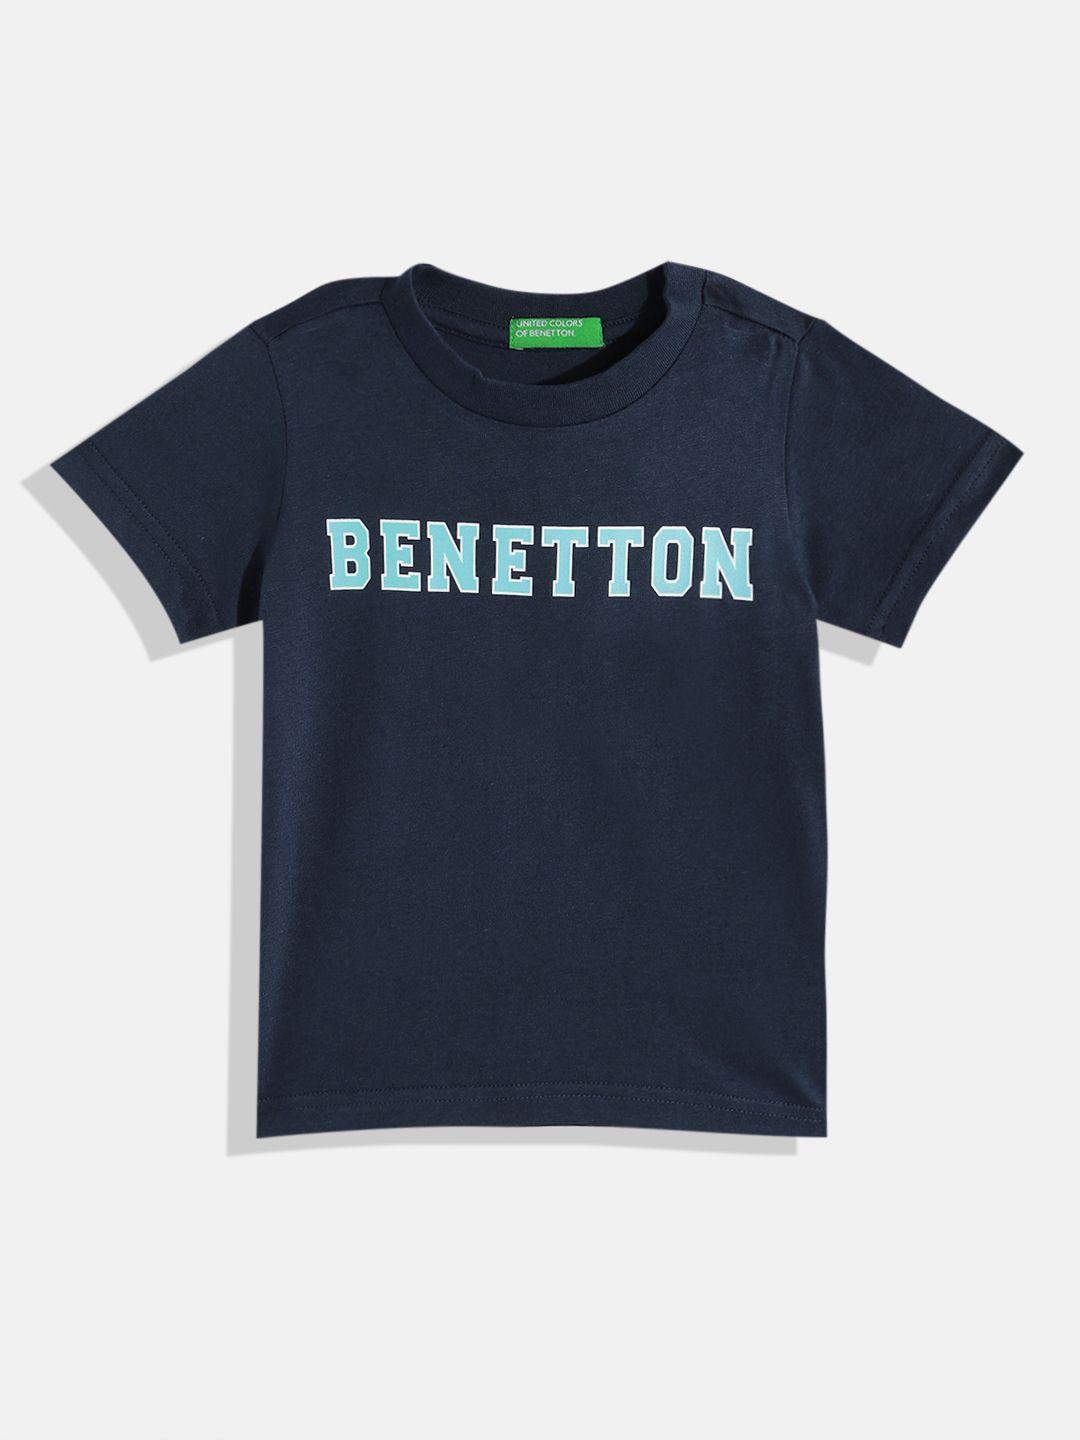 united colors of benetton boys pure cotton brand logo printed t-shirt